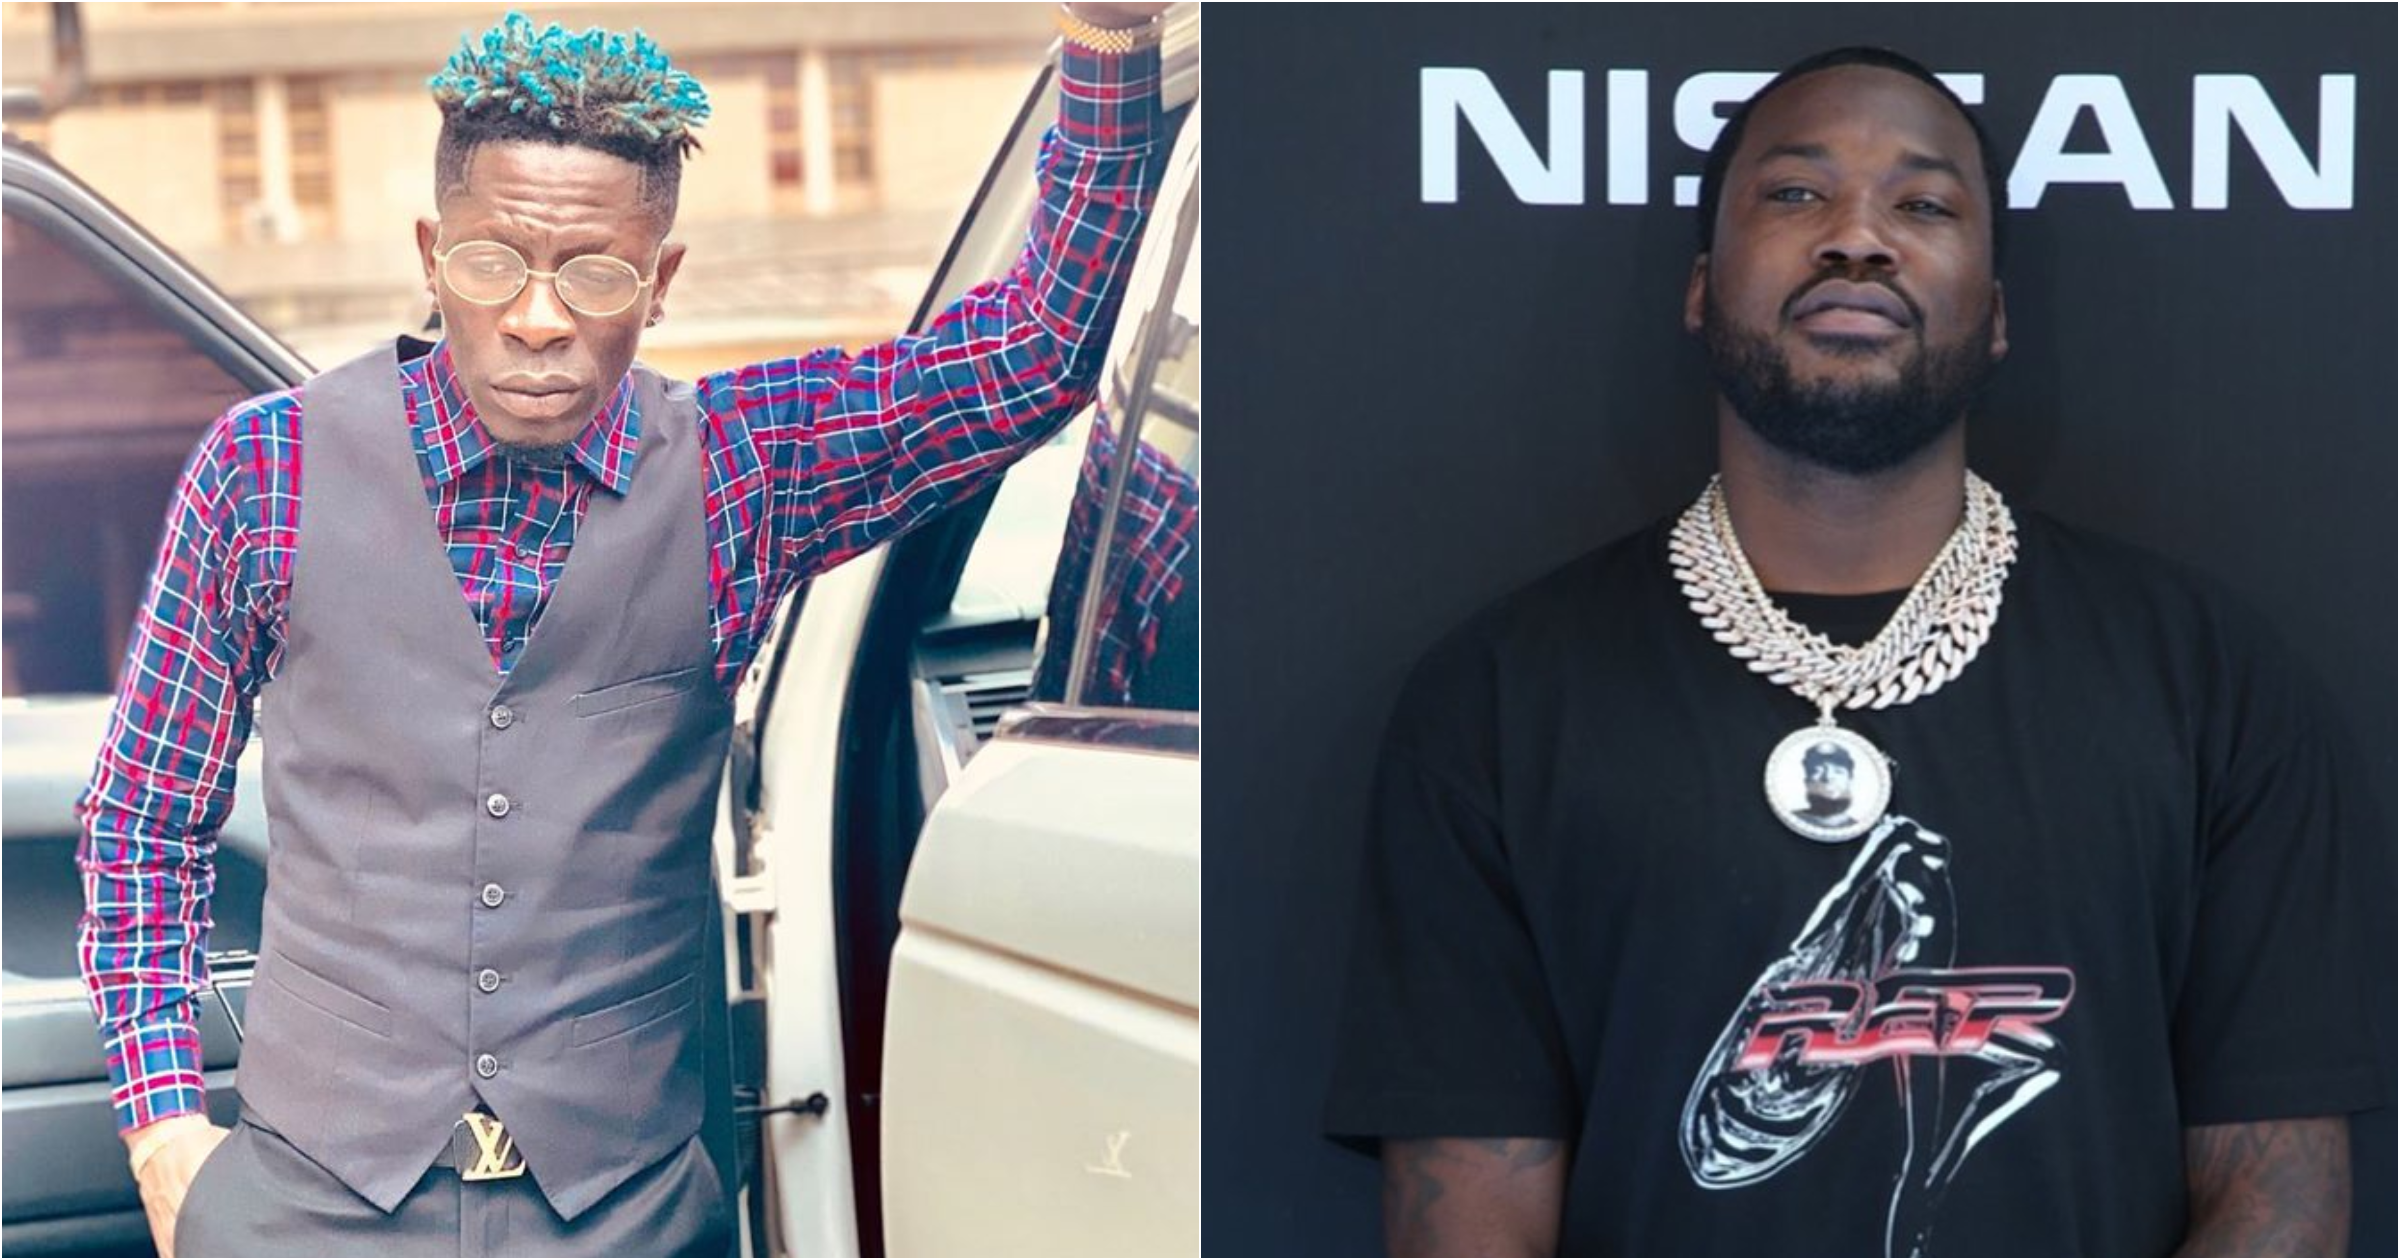 Meek Mill: Shatta Wale reportedly features American rapper on new song